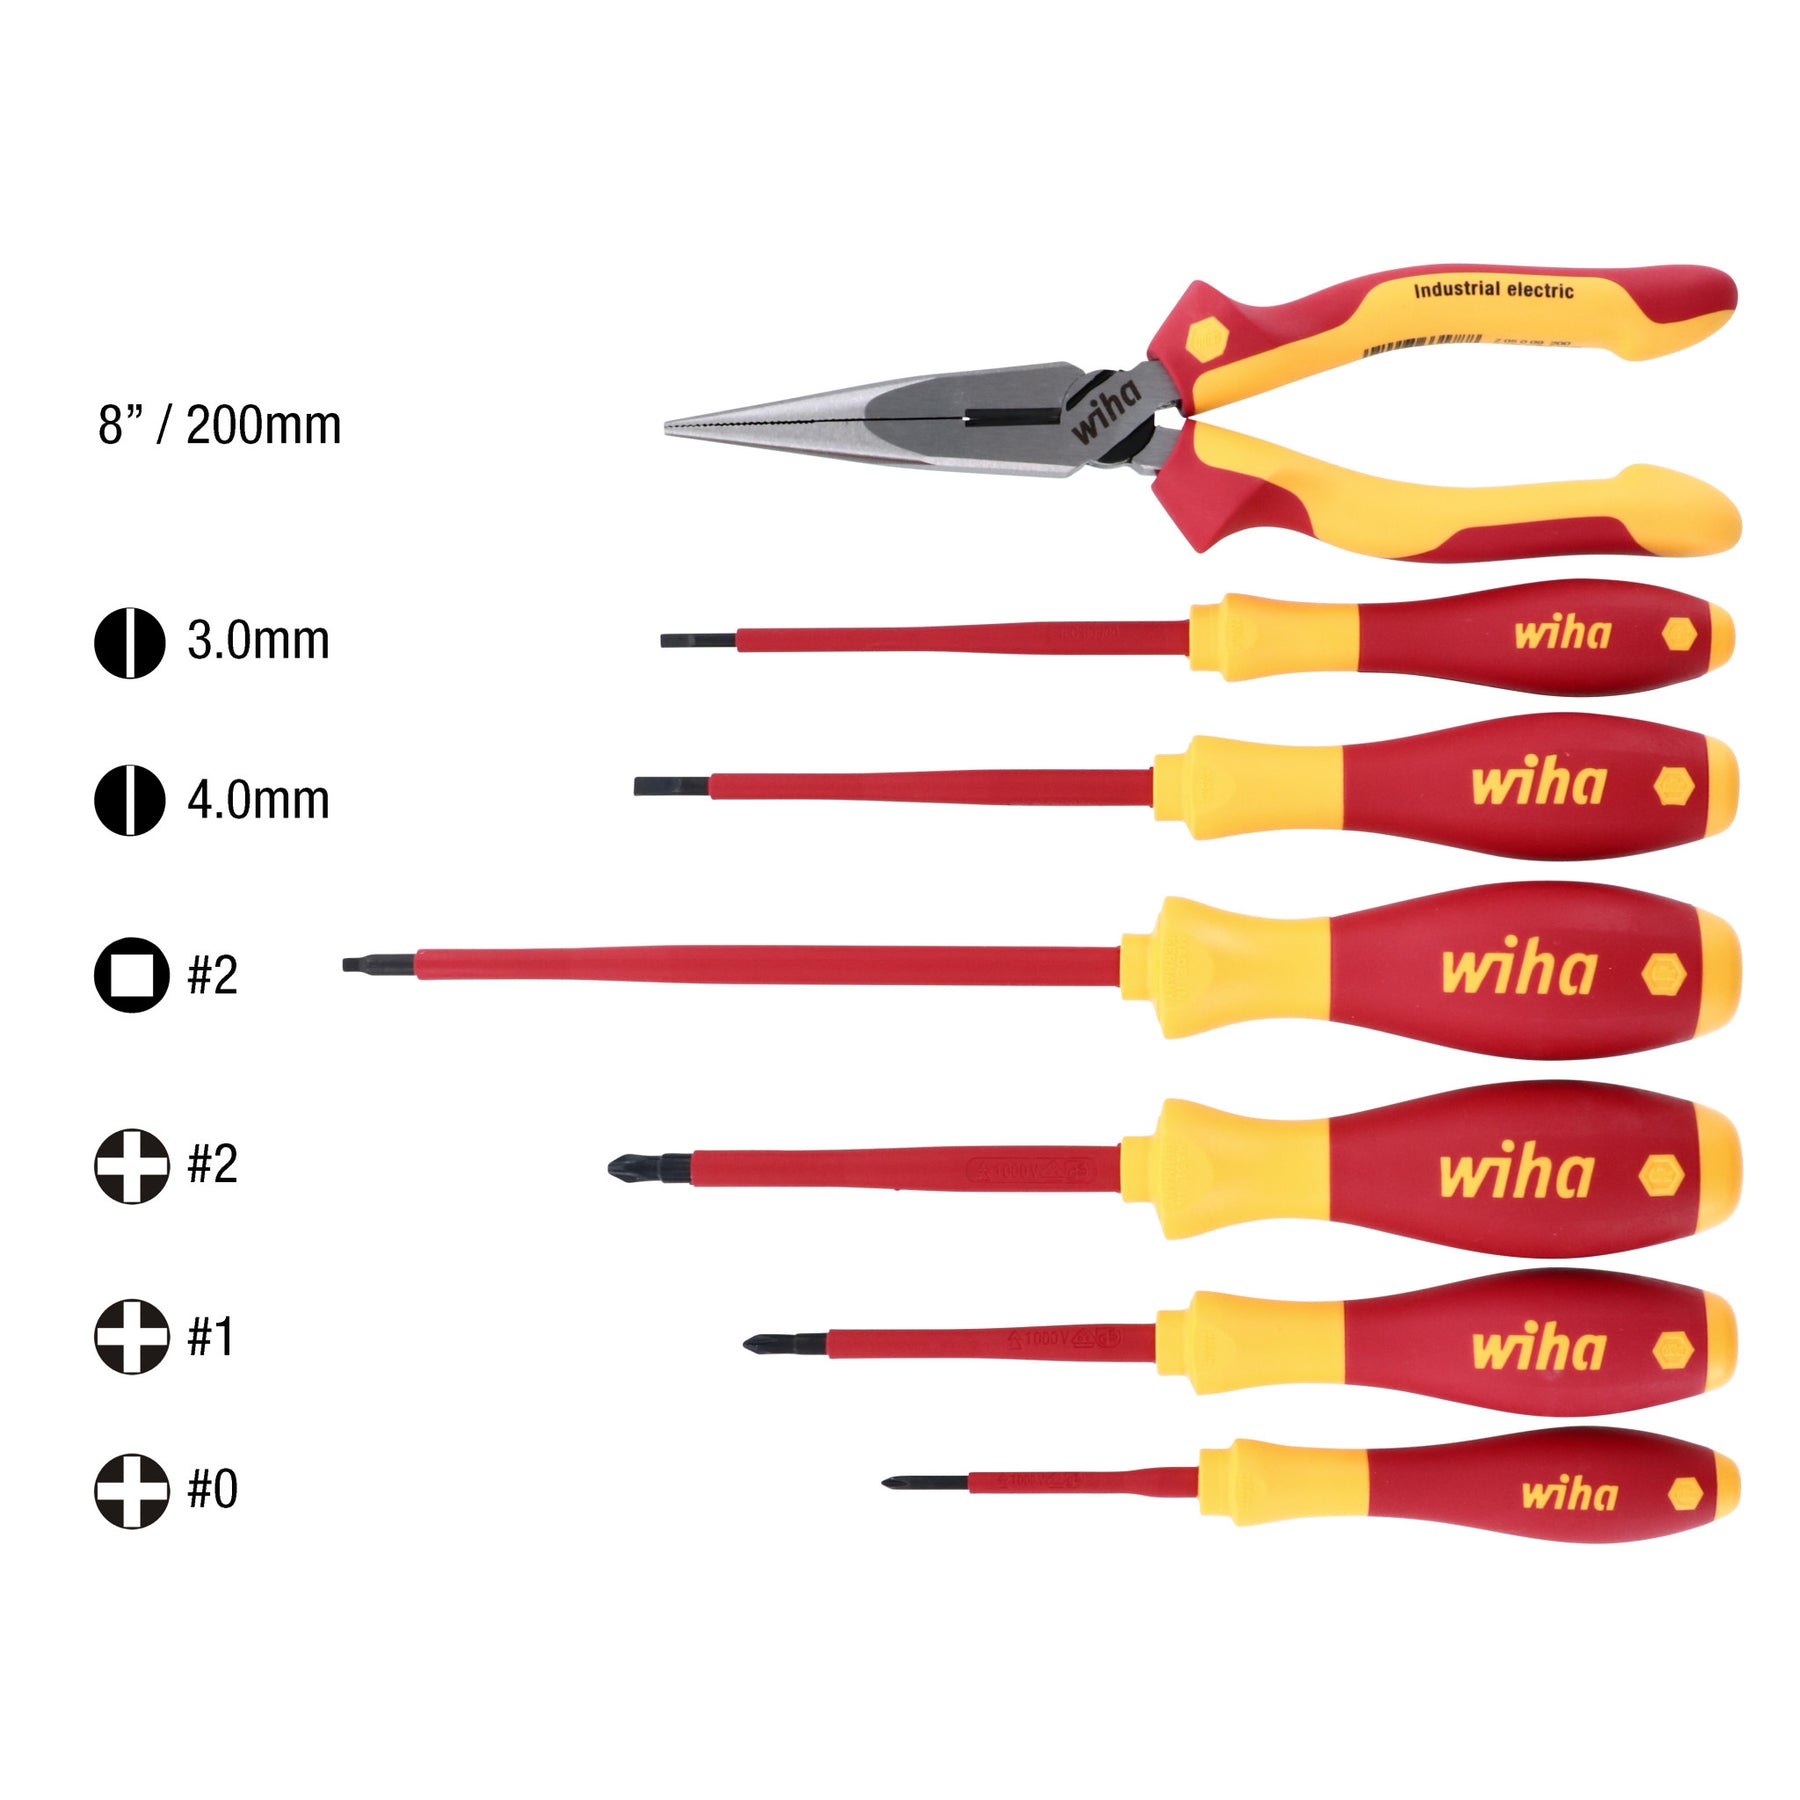 7 Piece Insulated SoftFinish Screwdriver and Long Nose Pliers Set